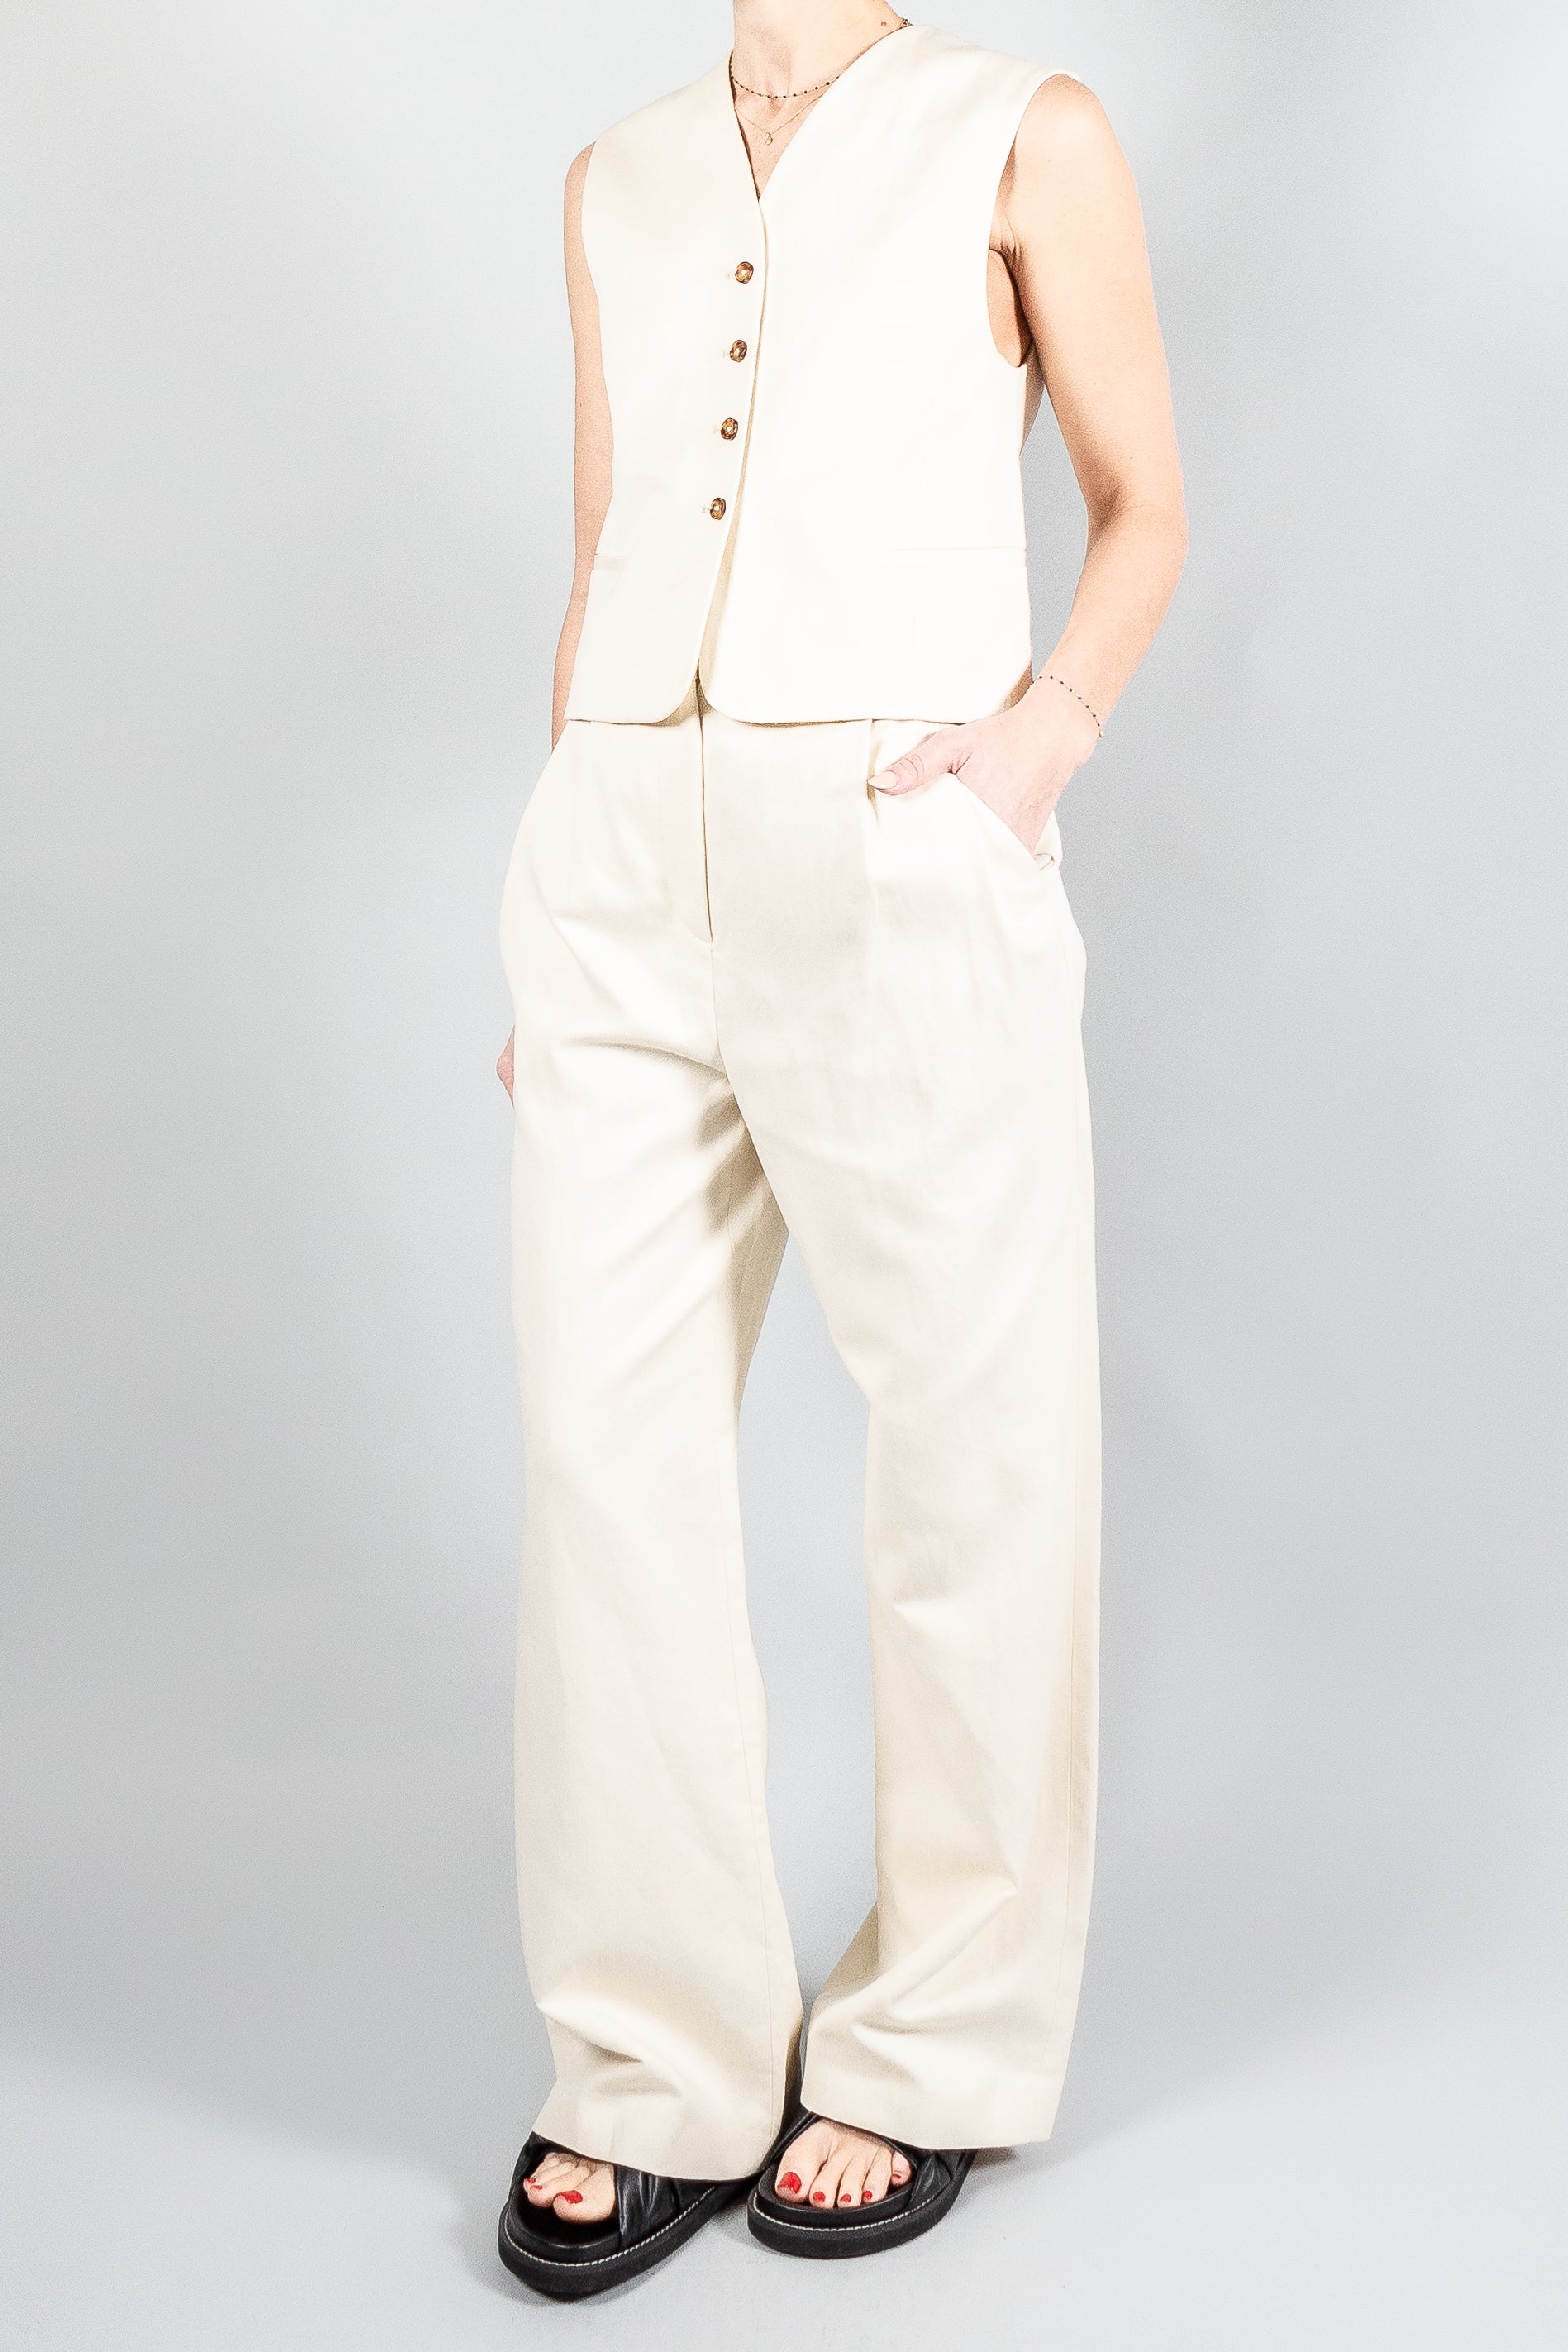 Loulou Studio Idai Pants-Pants and Shorts-Misch-Boutique-Vancouver-Canada-misch.ca